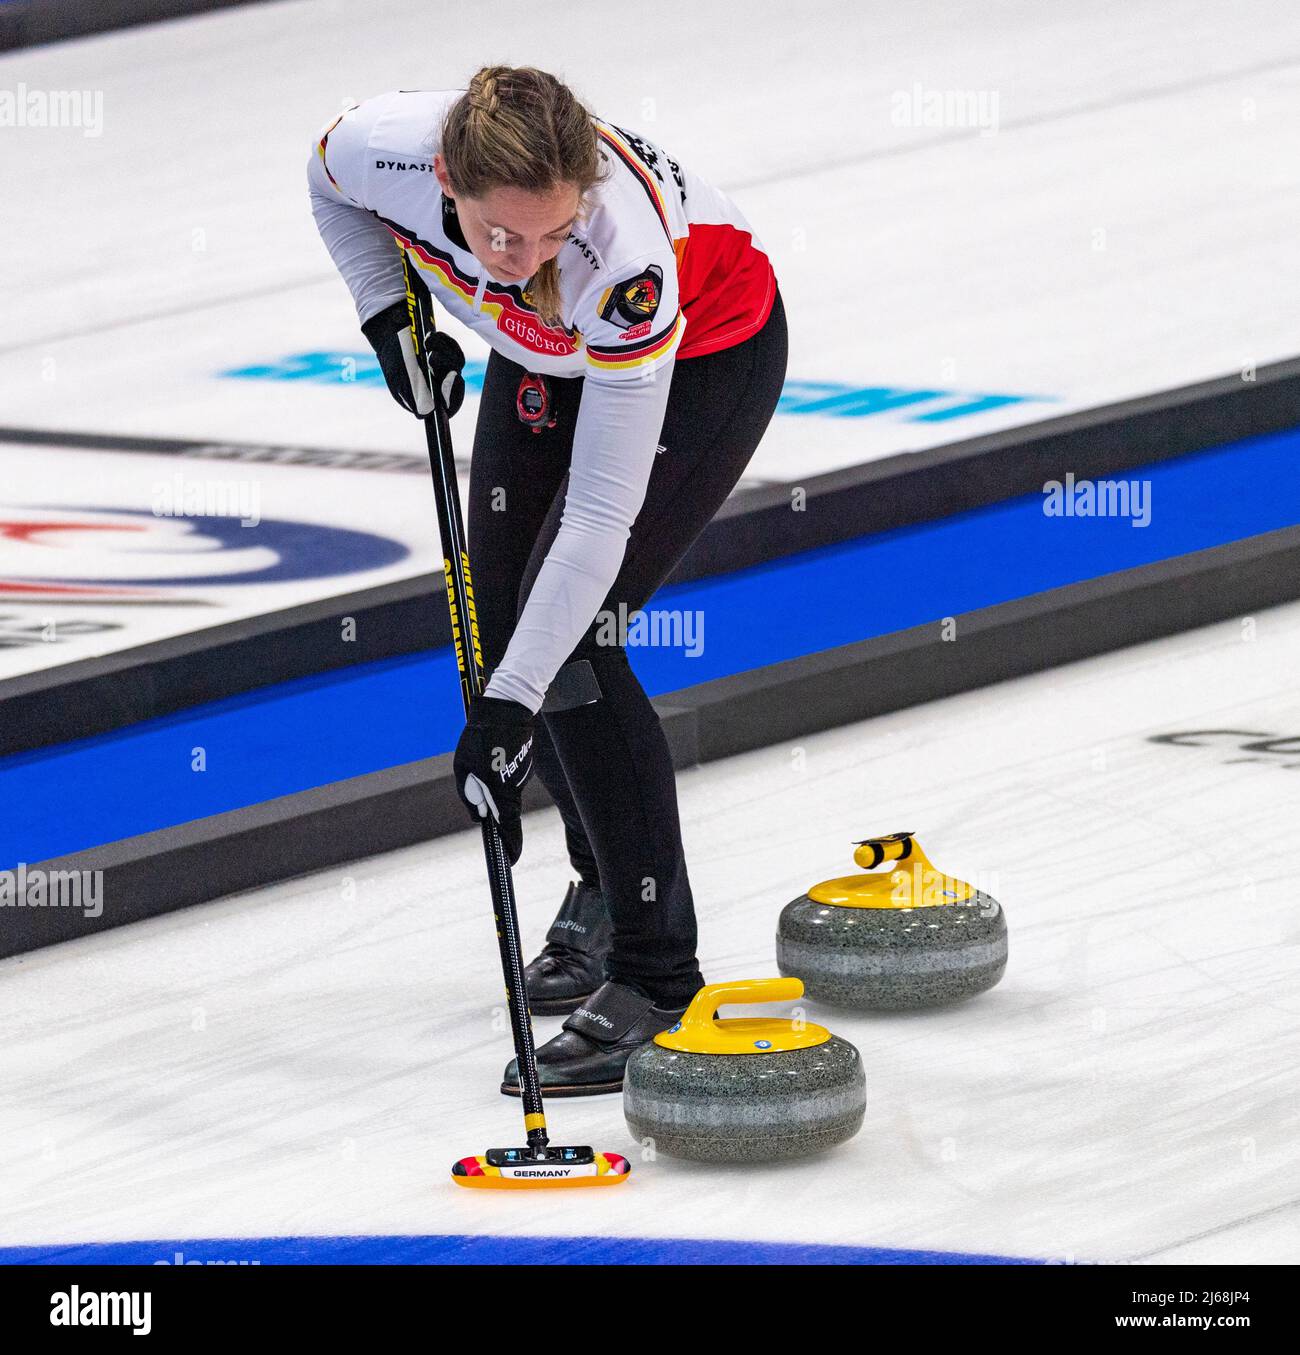 Geneva Switzerland, 29th April 2022 Pia-Lisa SCHOELL of Team Germany is in action during the World Mixed Doubles Curling Championship 2022